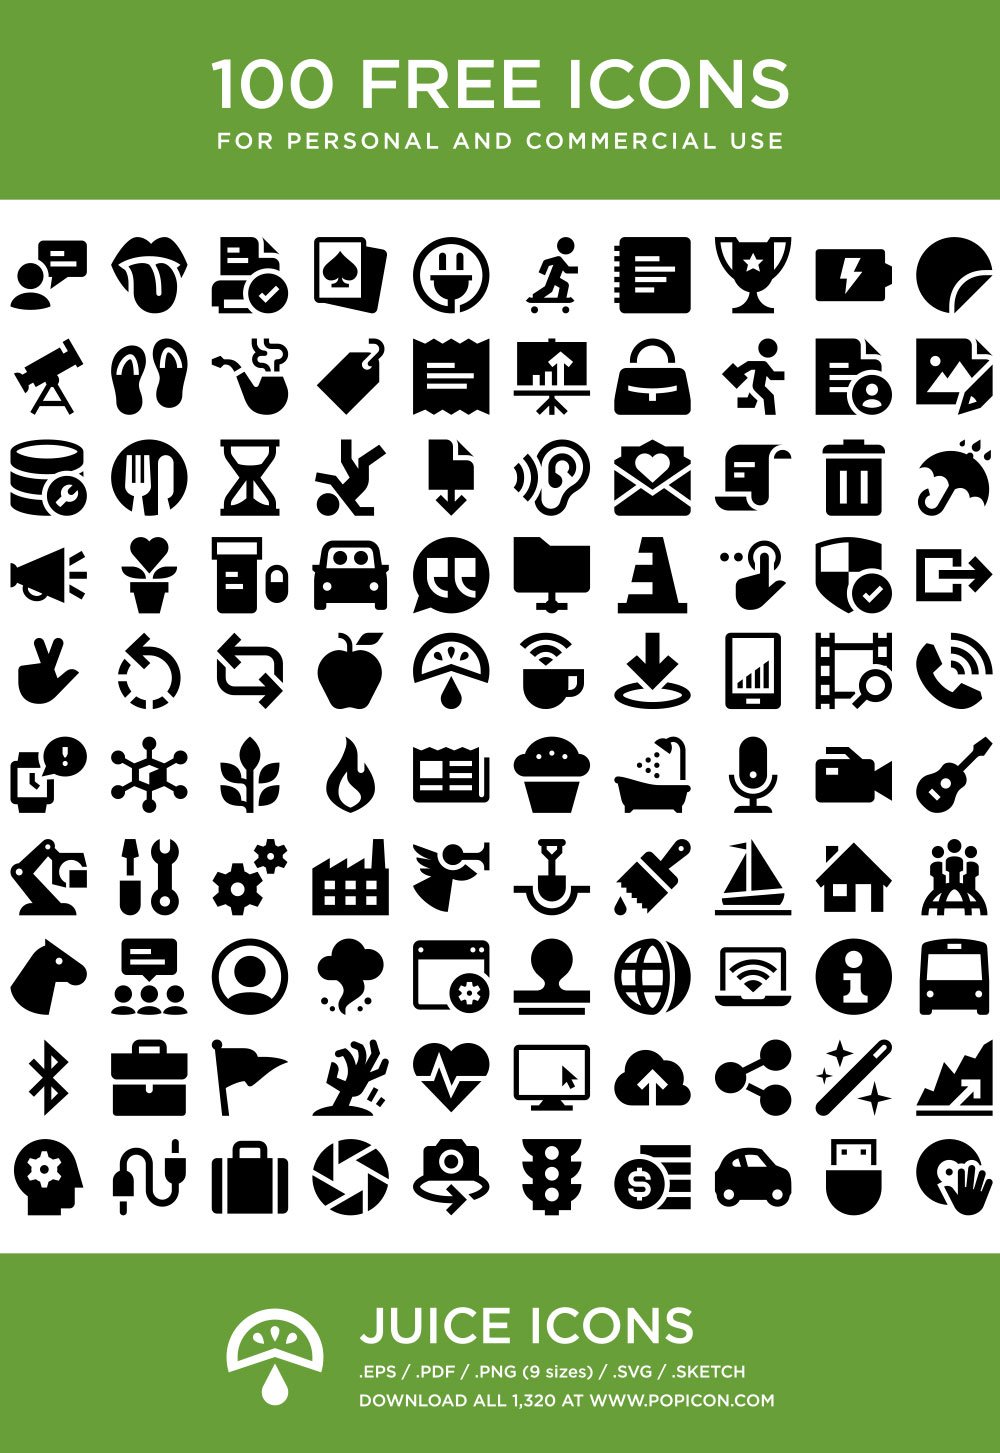 free svg icons for commercial use